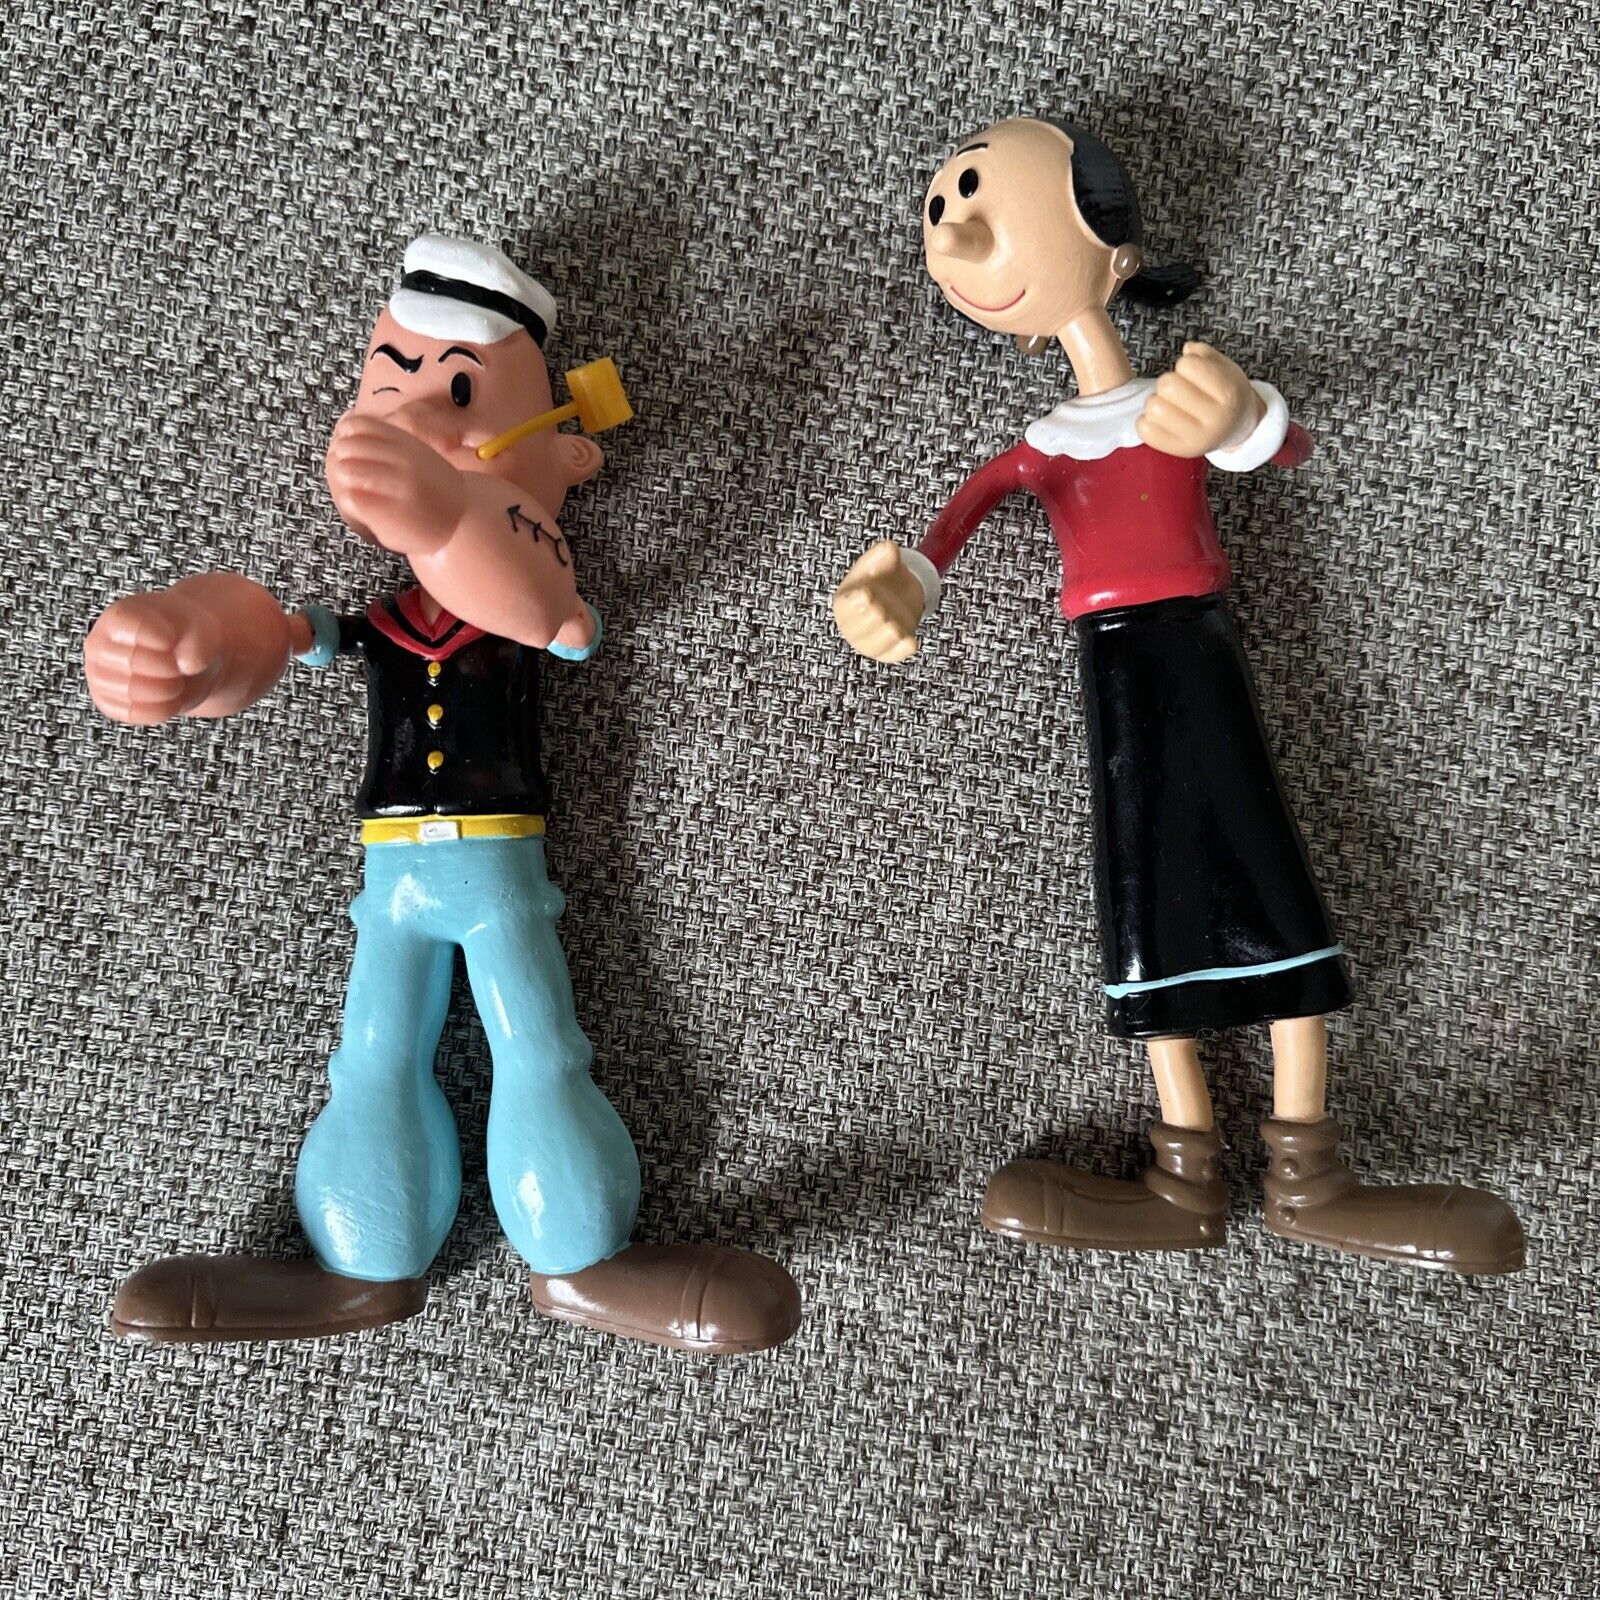 Popeye and Olive Oyl Vintage Posable & Bendable Toy Figures